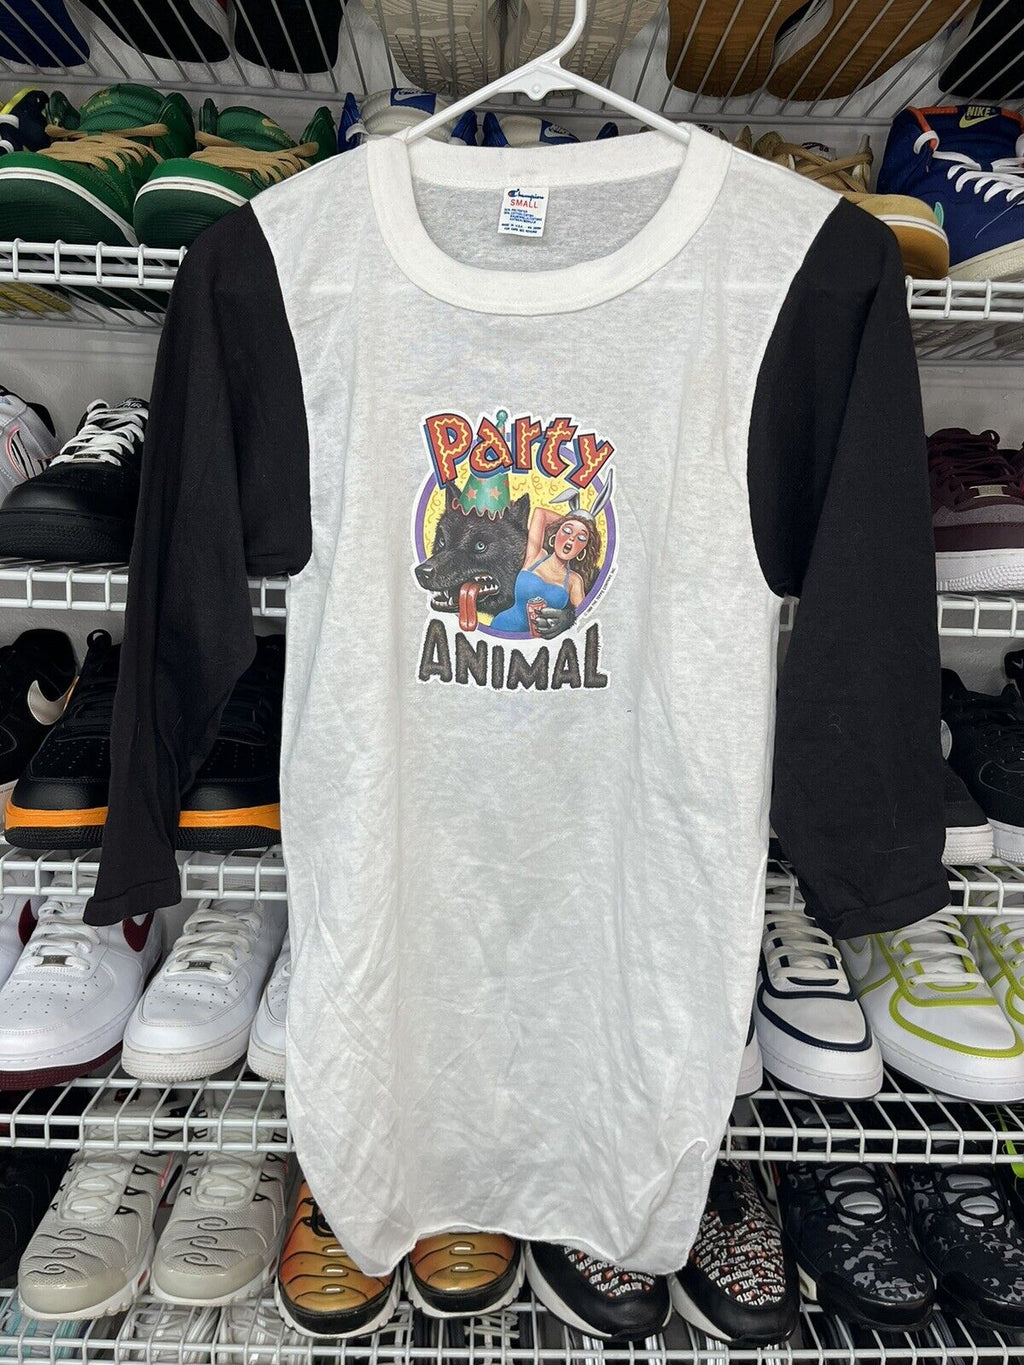 Vintage 80s Champion Topps Party Animal 3/4 Sleeve Shirt Men's Size Small - Hype Stew Sneakers Detroit